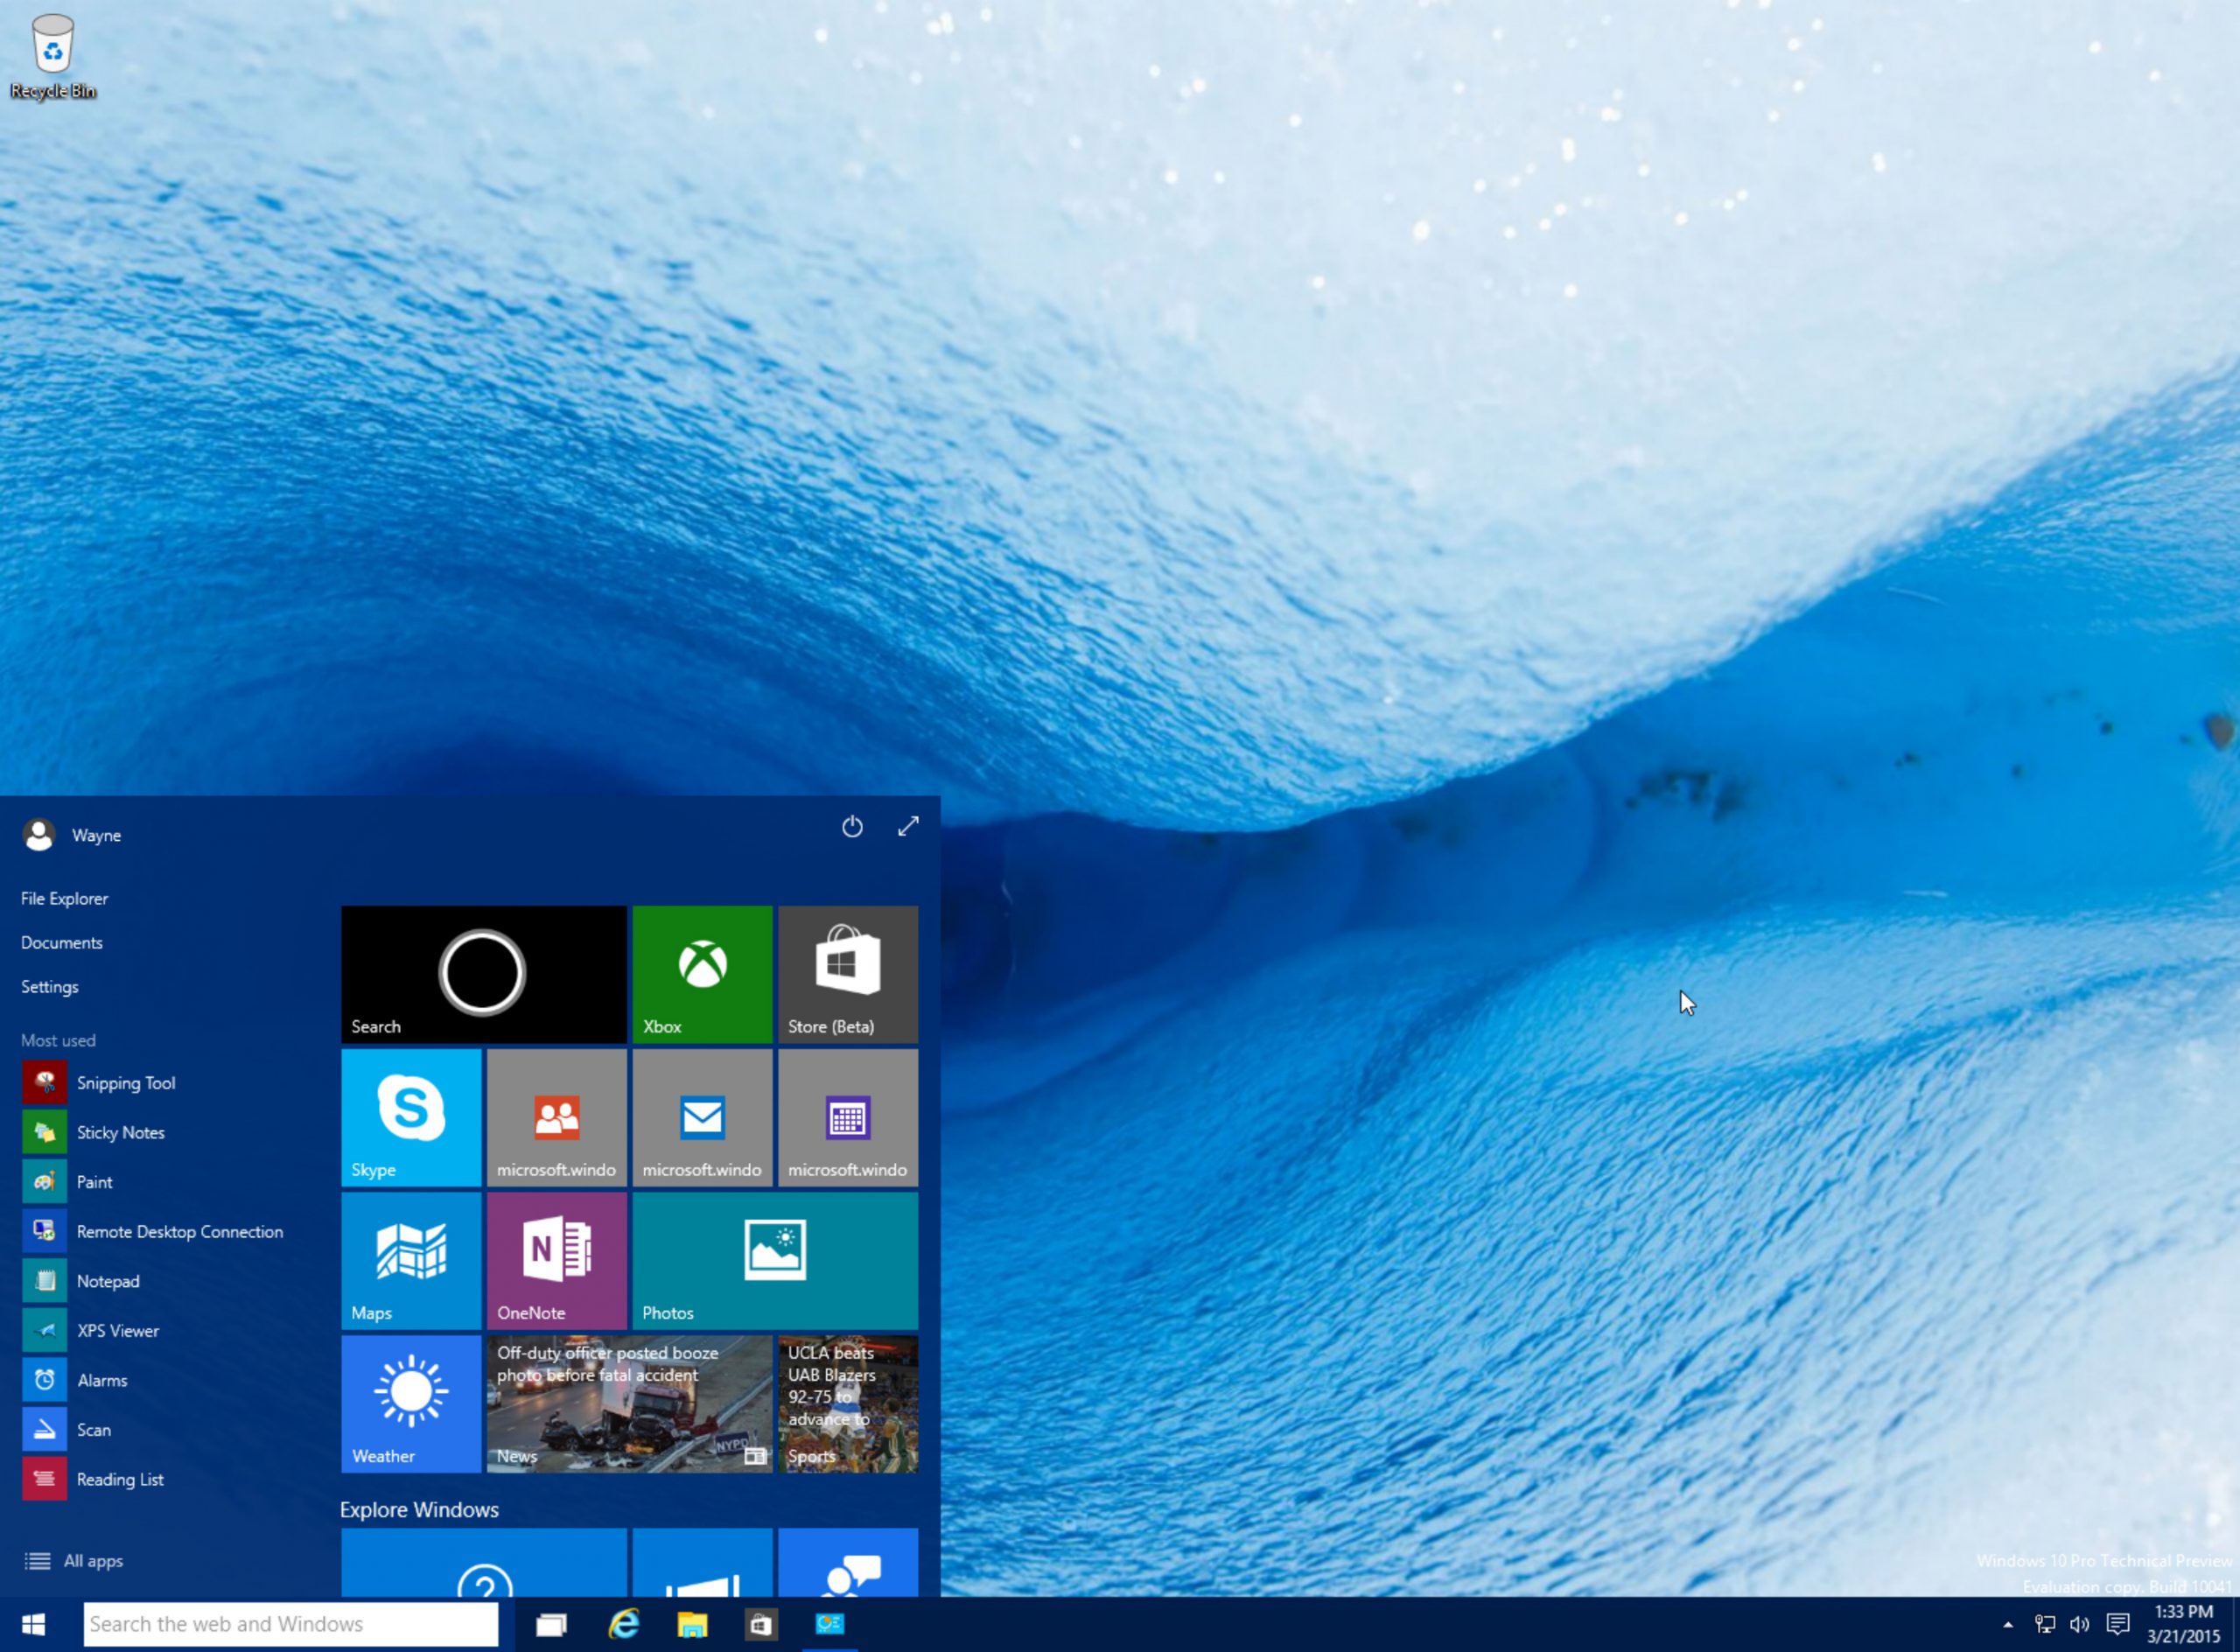 Download the ISO image of Windows 10 Build 10041 directly from Microsoft